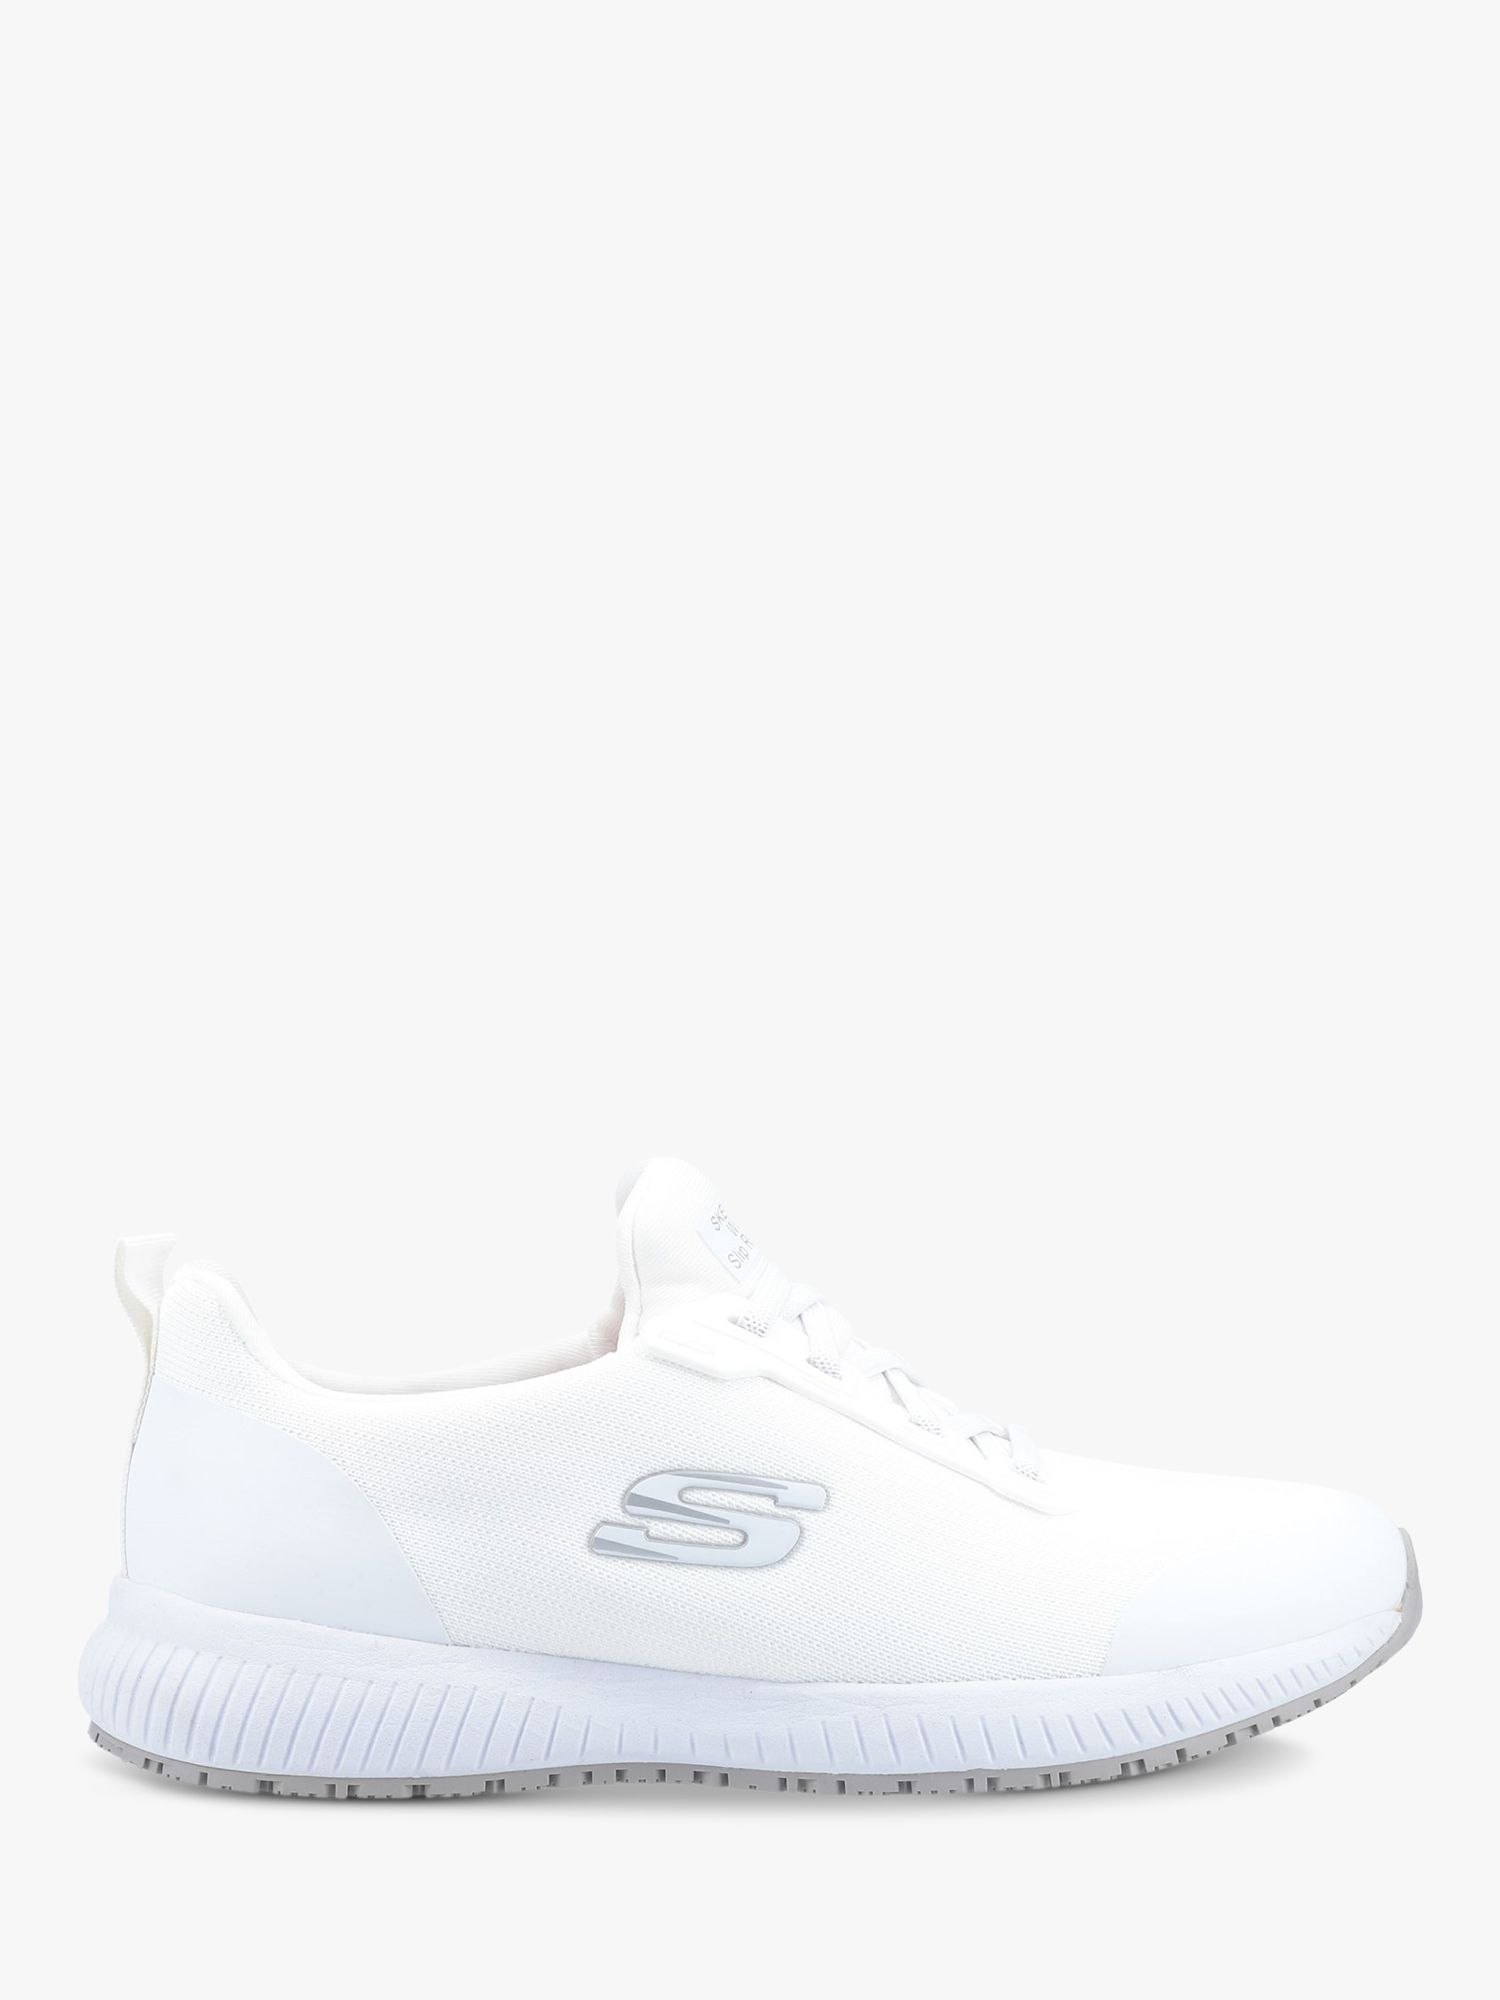 Skechers Squad SR Lace Up Trainers, White at John Lewis & Partners